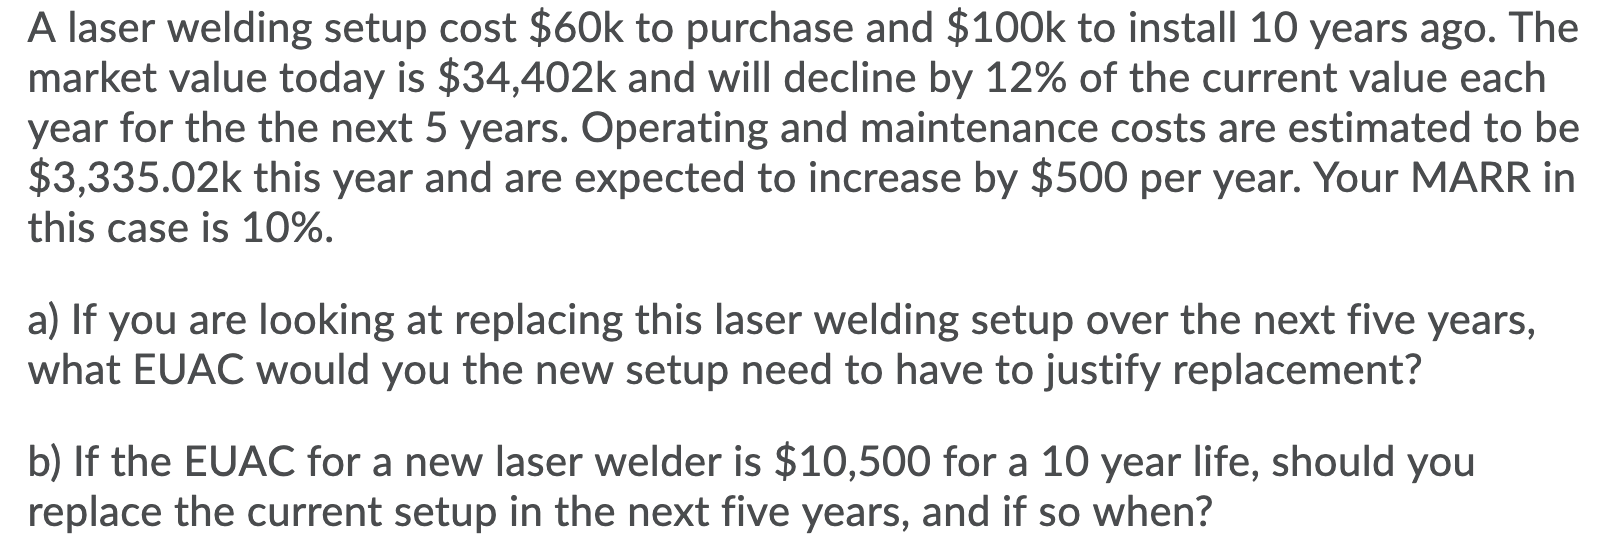 A laser welding setup cost $60k to purchase and $100k to install 10 years ago. The
market value today is $34,402k and will de